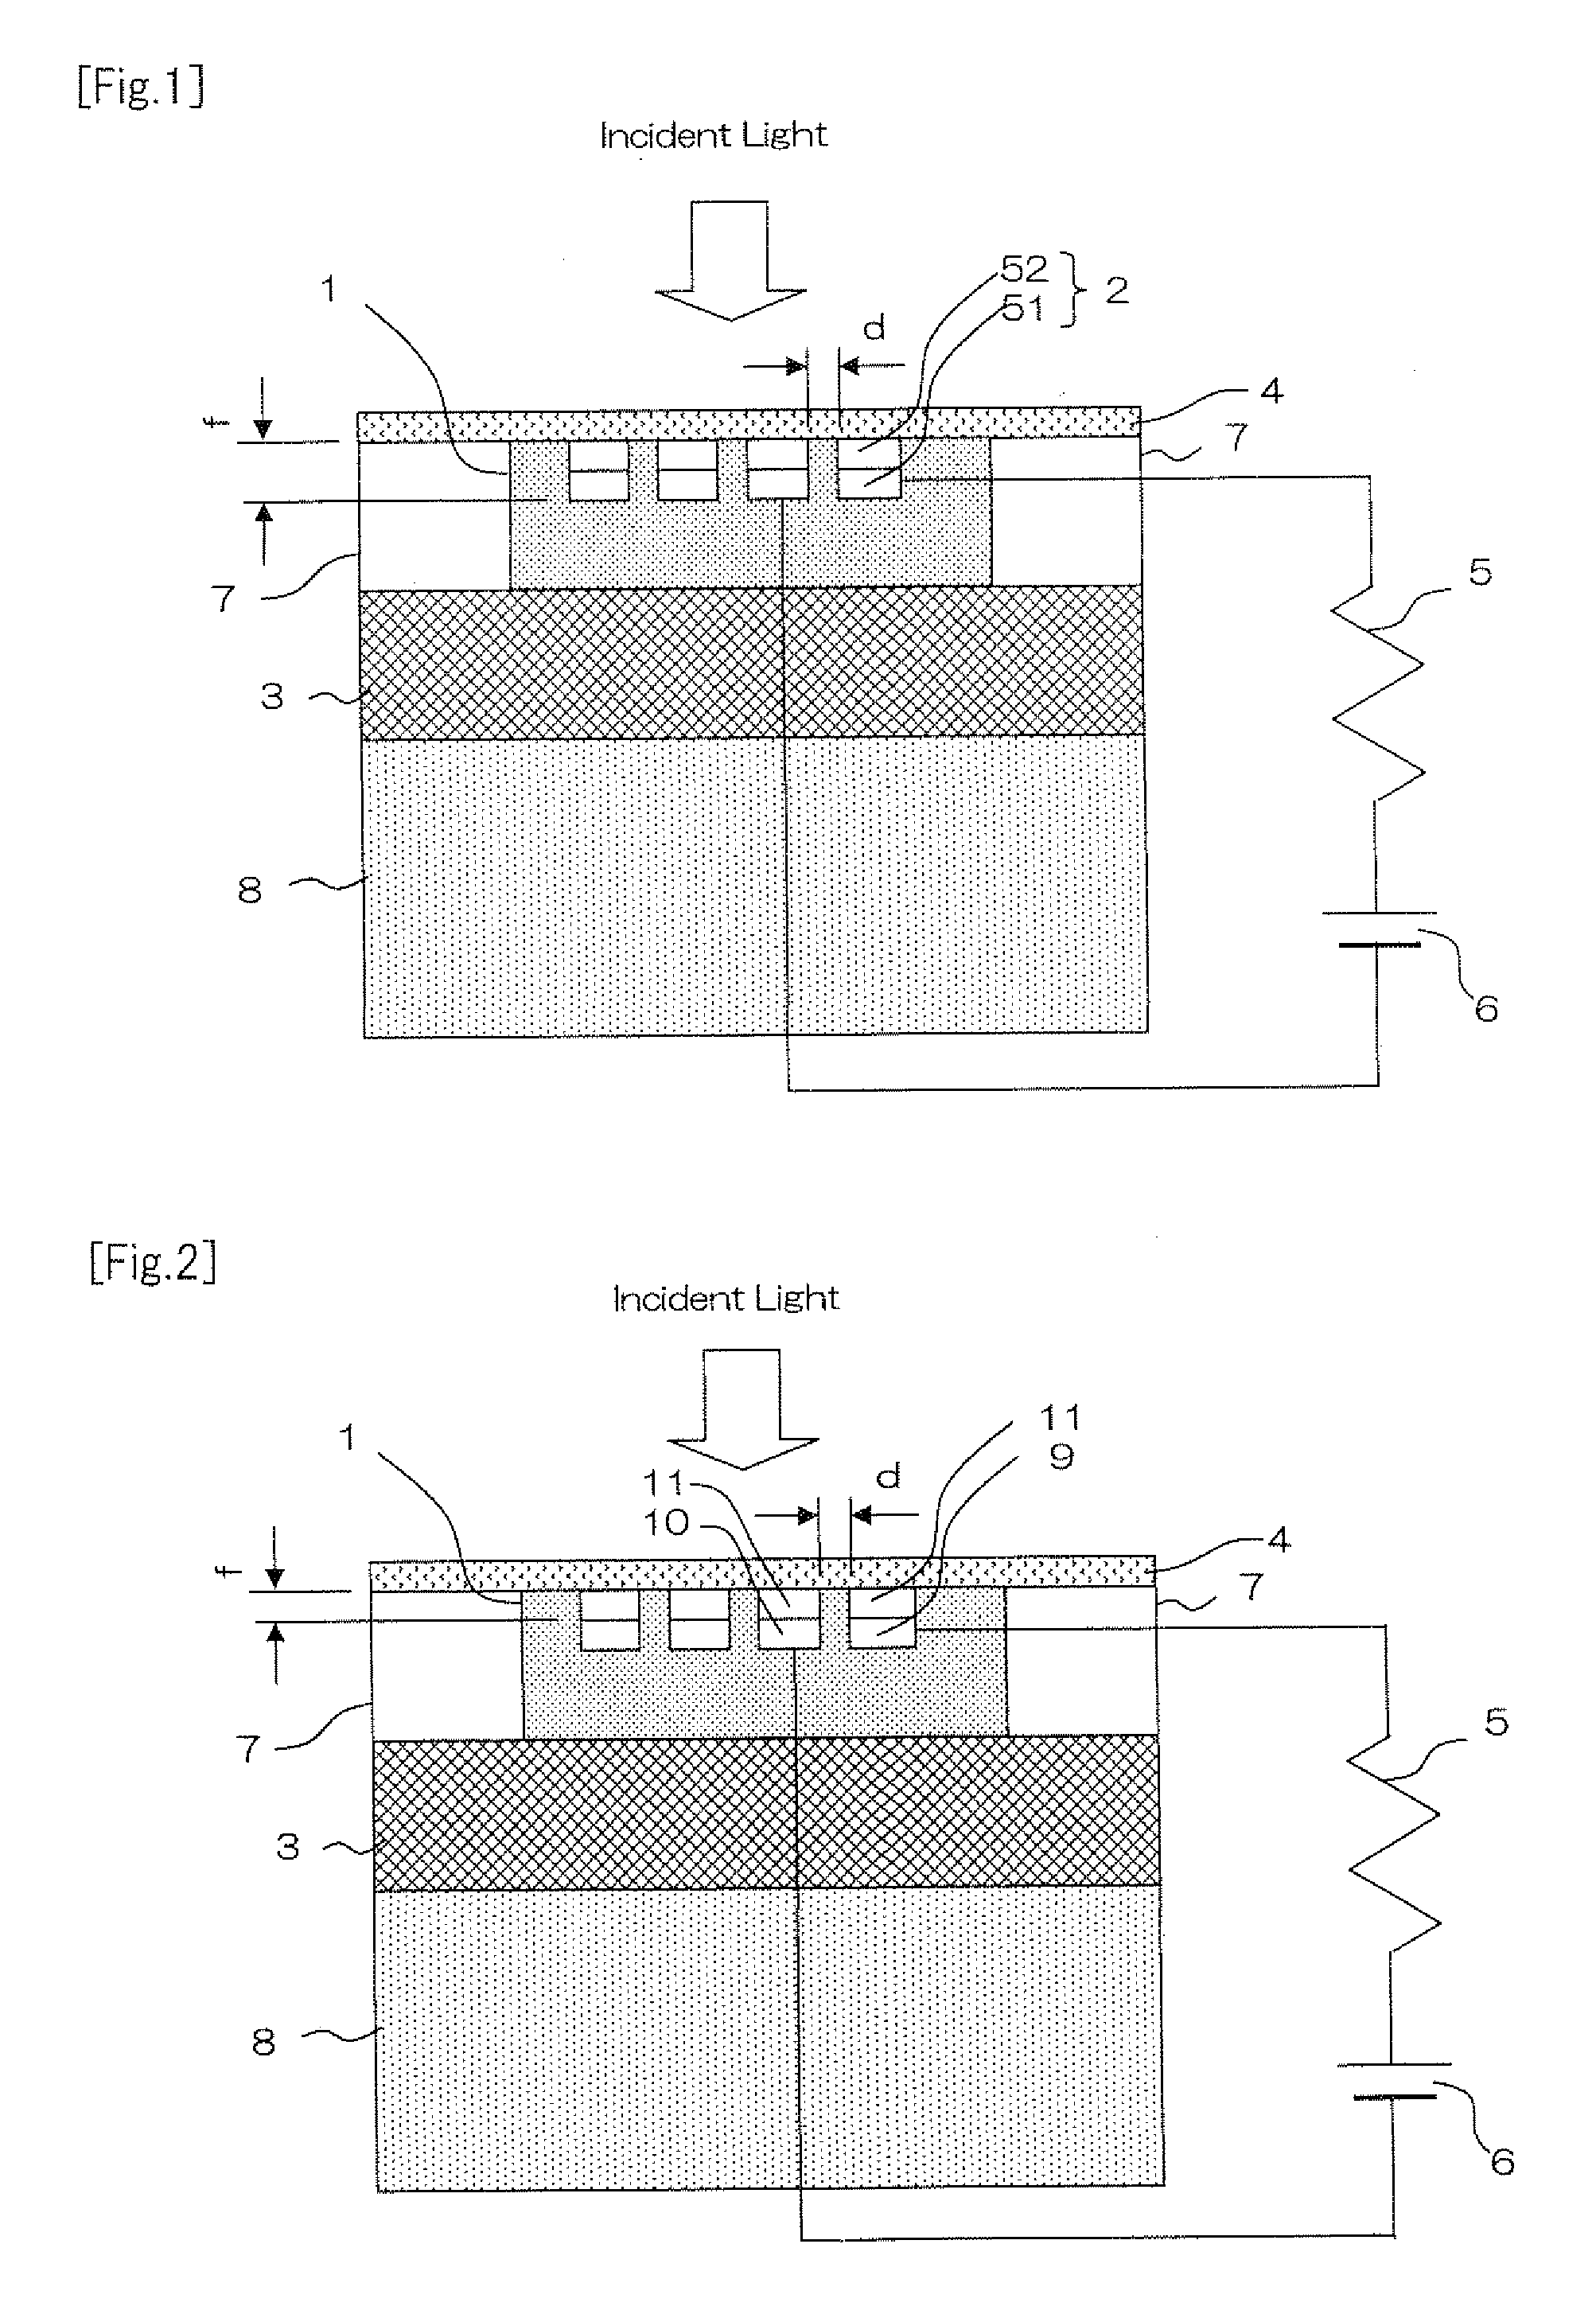 Photodiode, method for manufacturing such photodiode, optical communication device and optical interconnection module